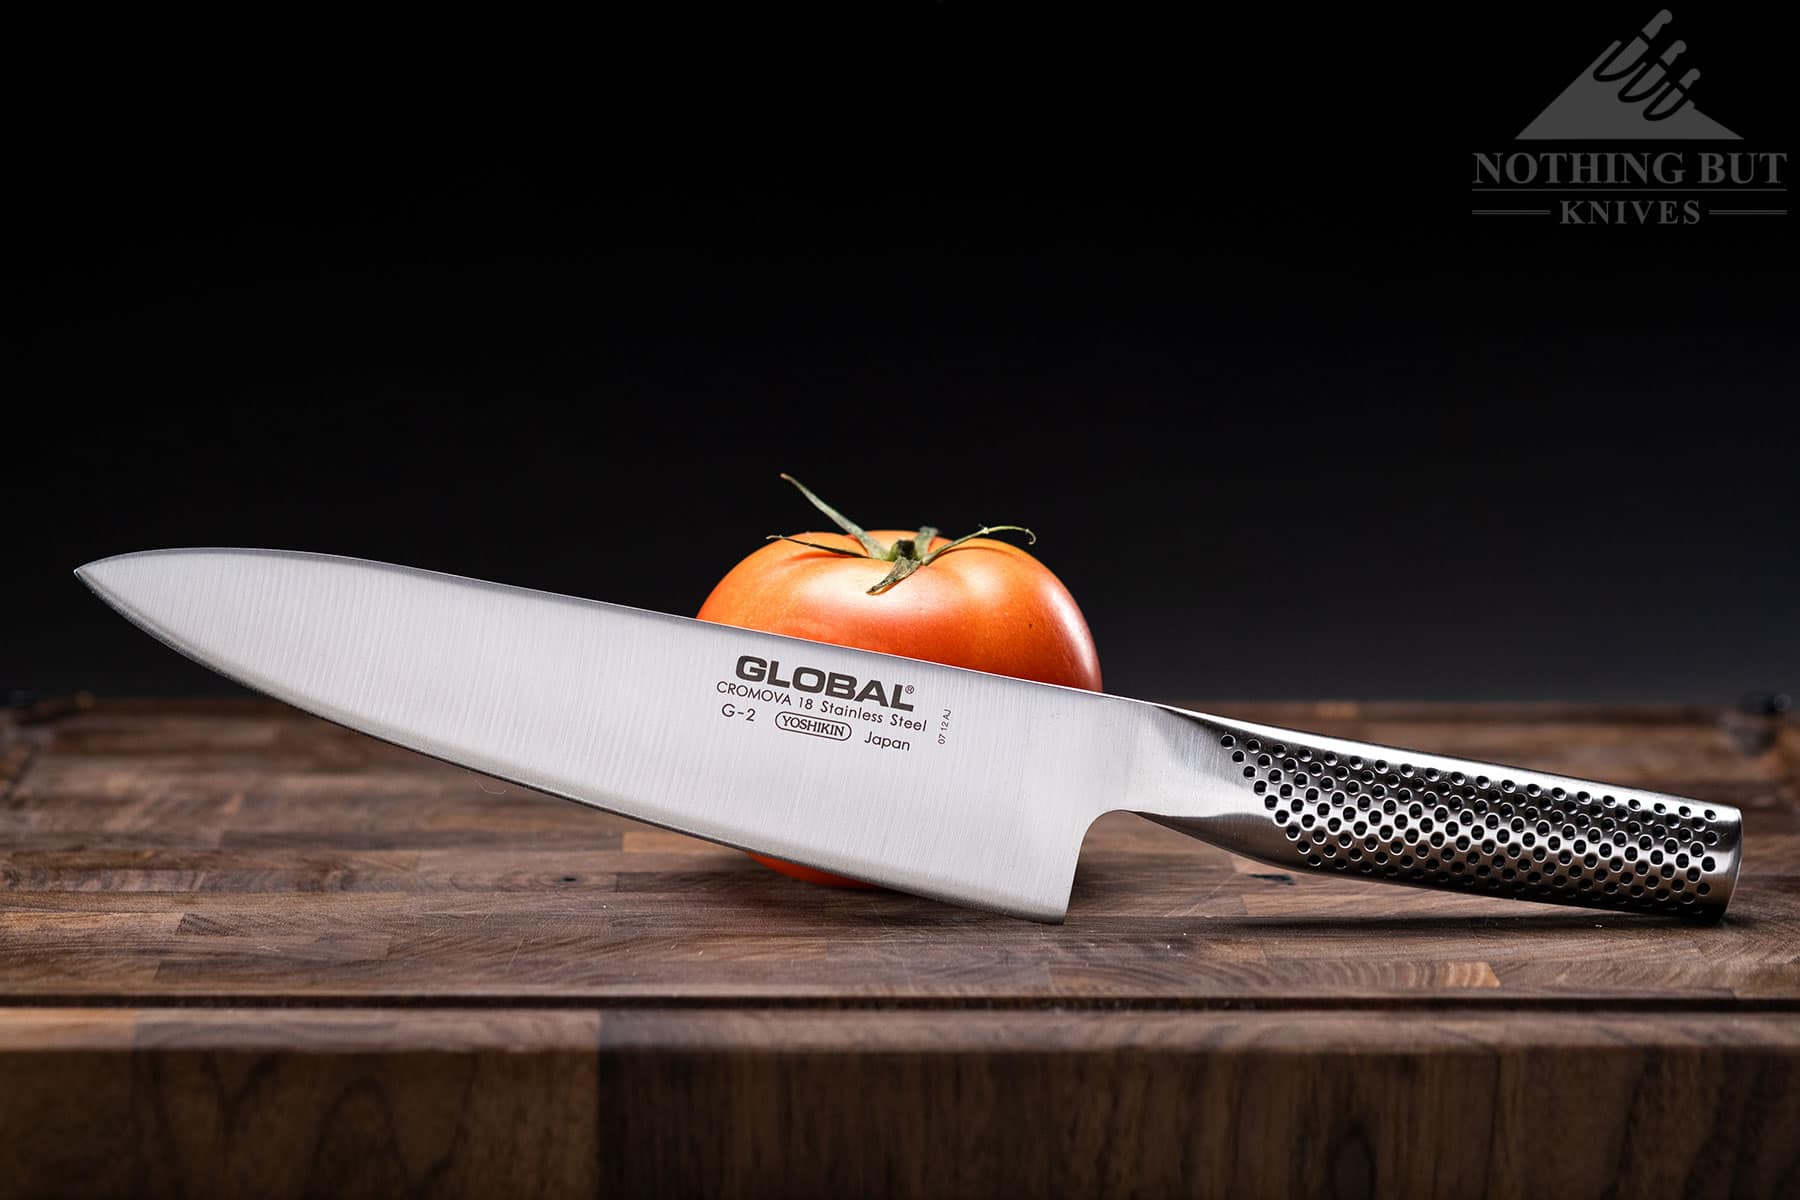 Global 8 Chef's Knife - Model x with Hollow Edge